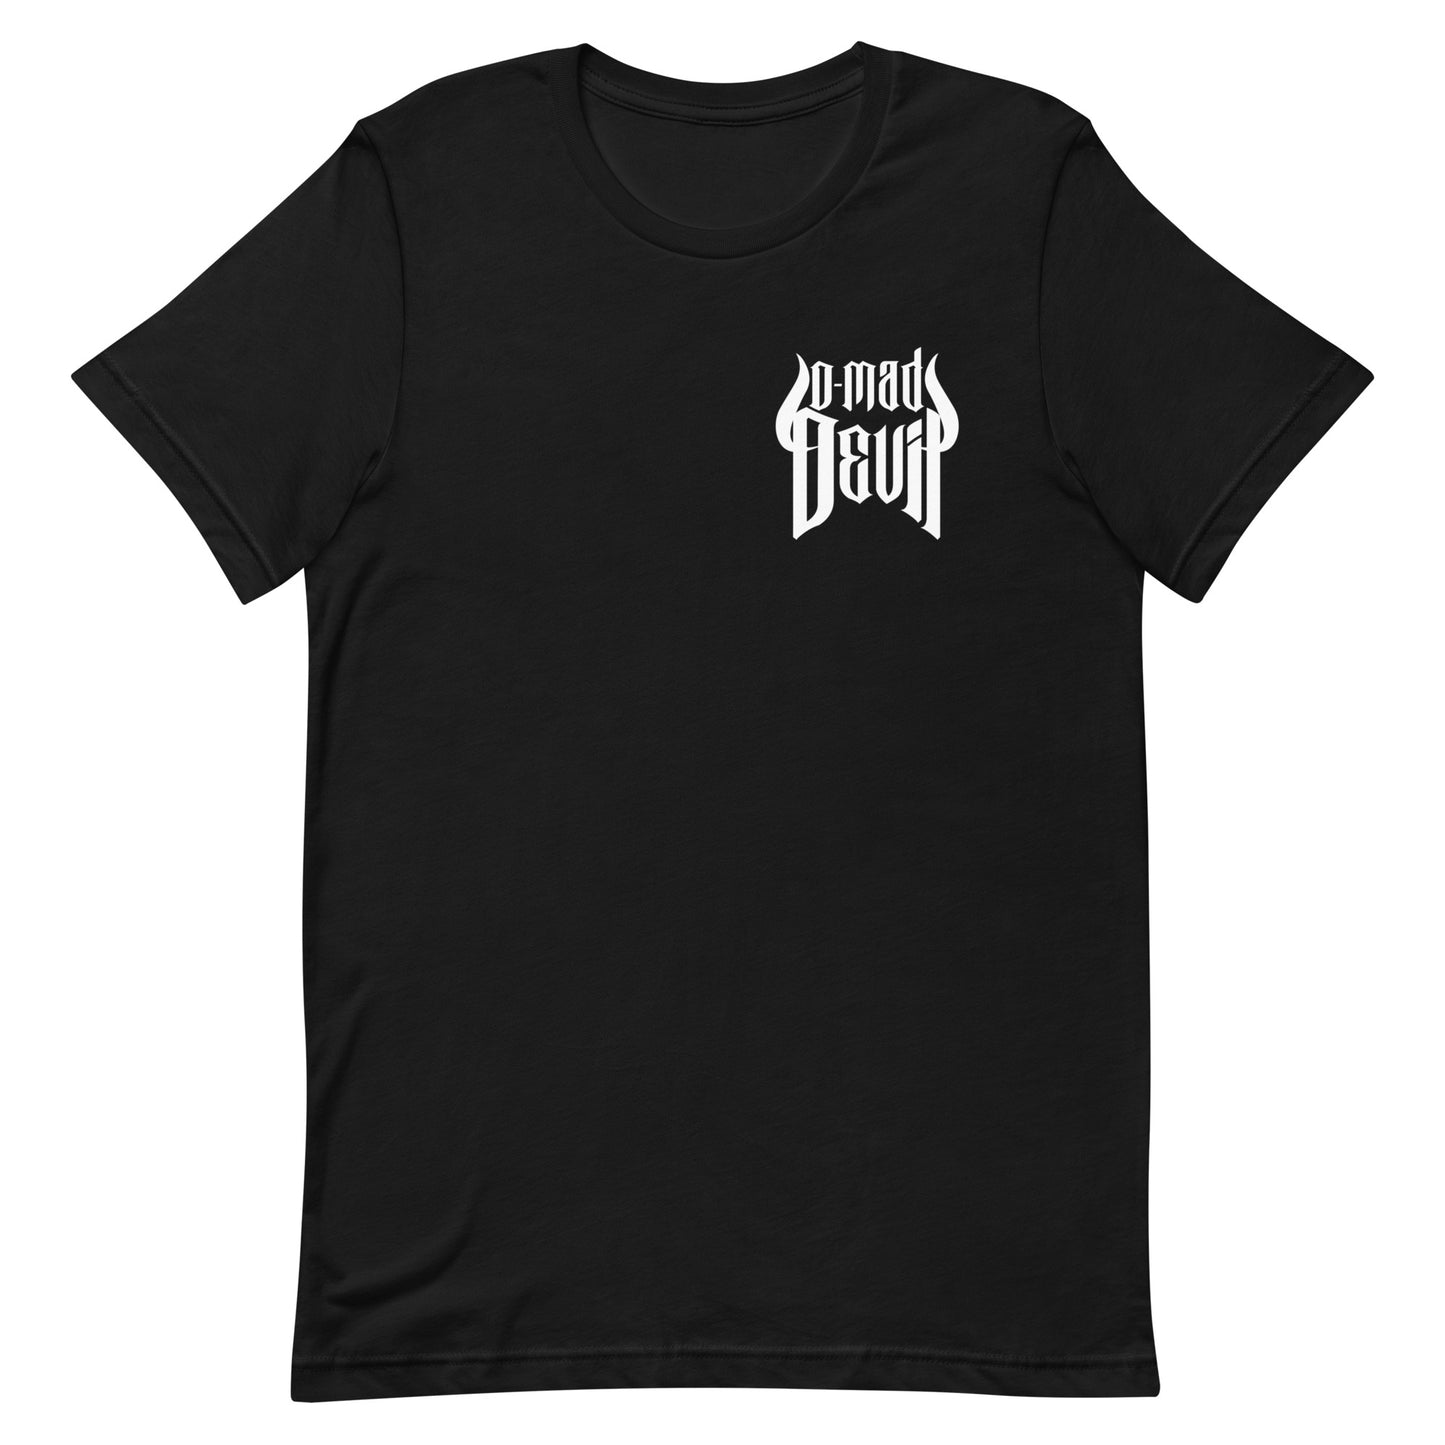 One With the Darkness Tee - Black